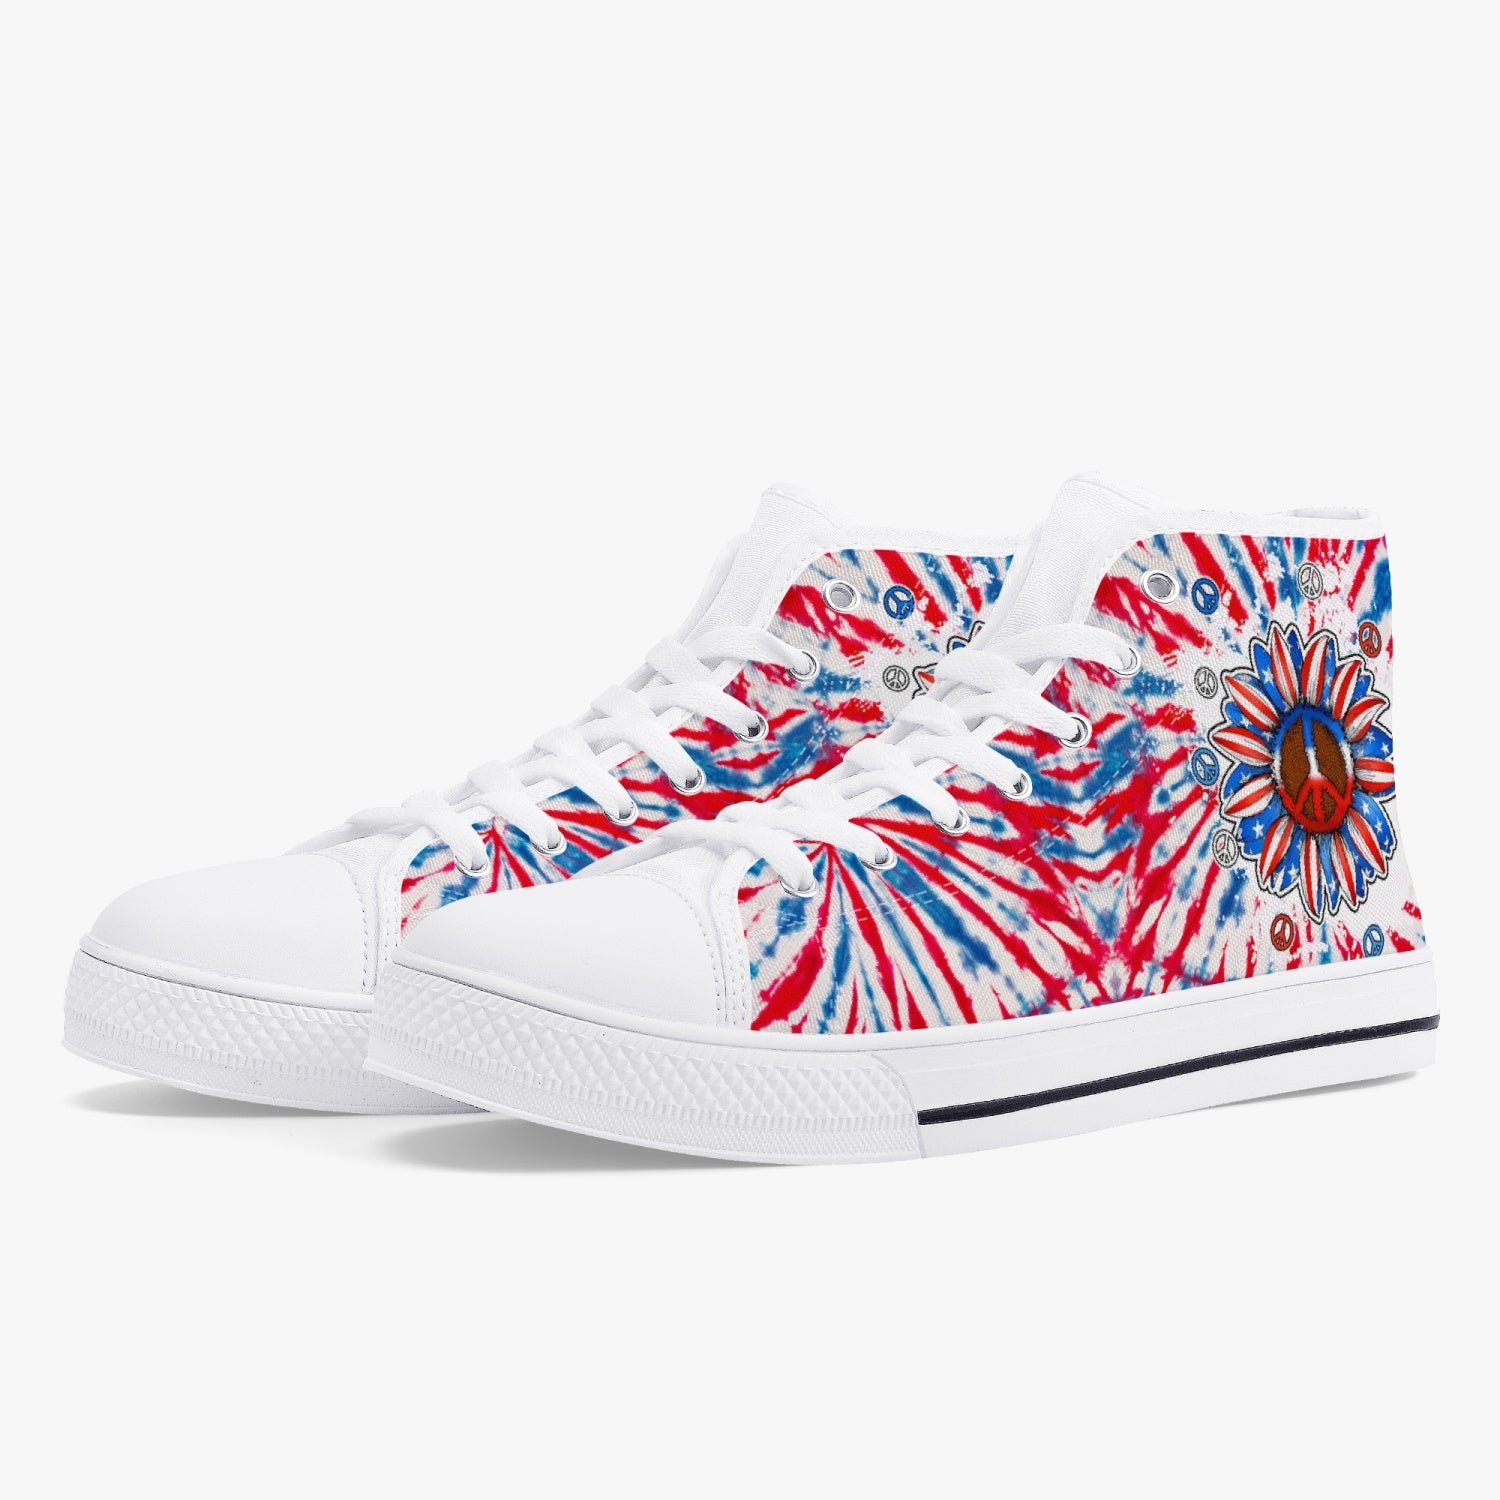 PEACE Y'ALL SUNFLOWER AMERICA TIE DYE HIGH TOP CANVAS SHOES - TLTW2306239